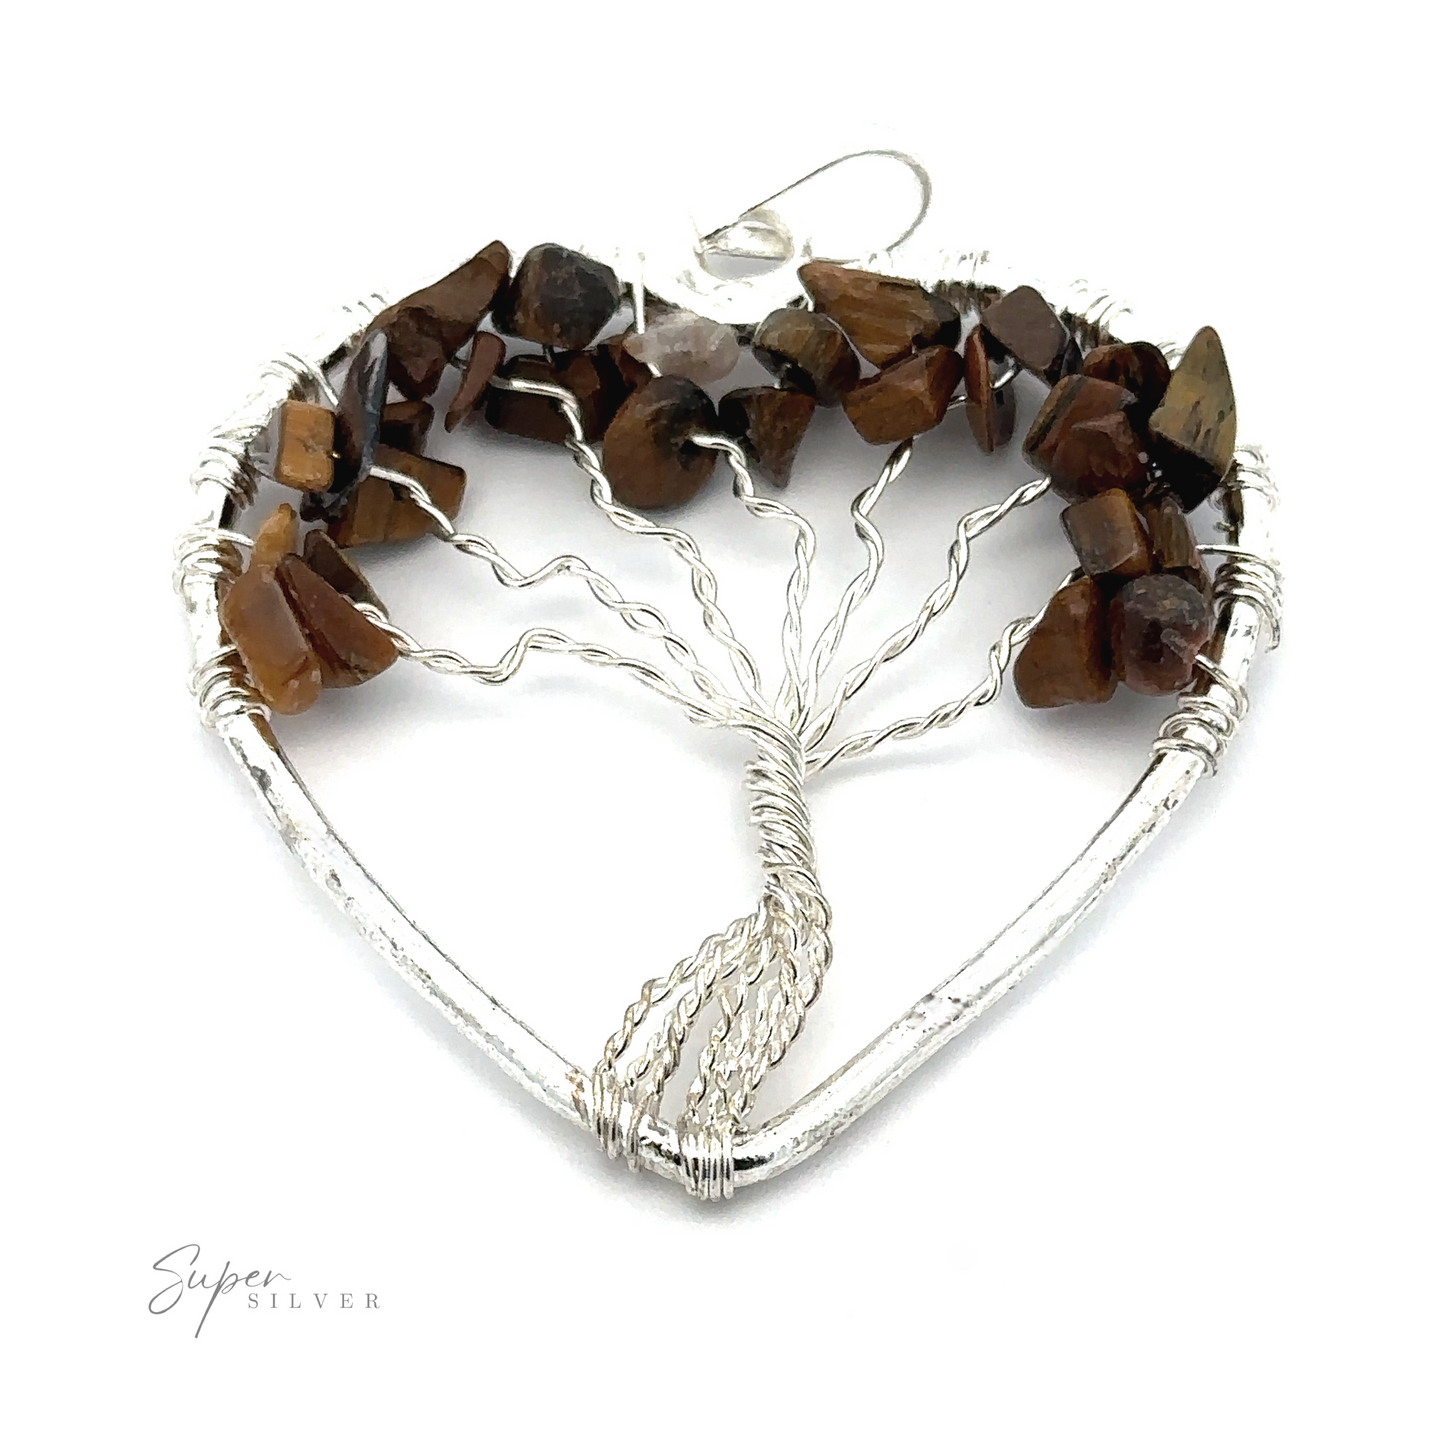 
                  
                    Heart Shaped Tree of Life Pendant featuring an intricate tree of life design, adorned with raw stone beads. The "Super Silver" branding is prominently visible in the bottom left corner.
                  
                